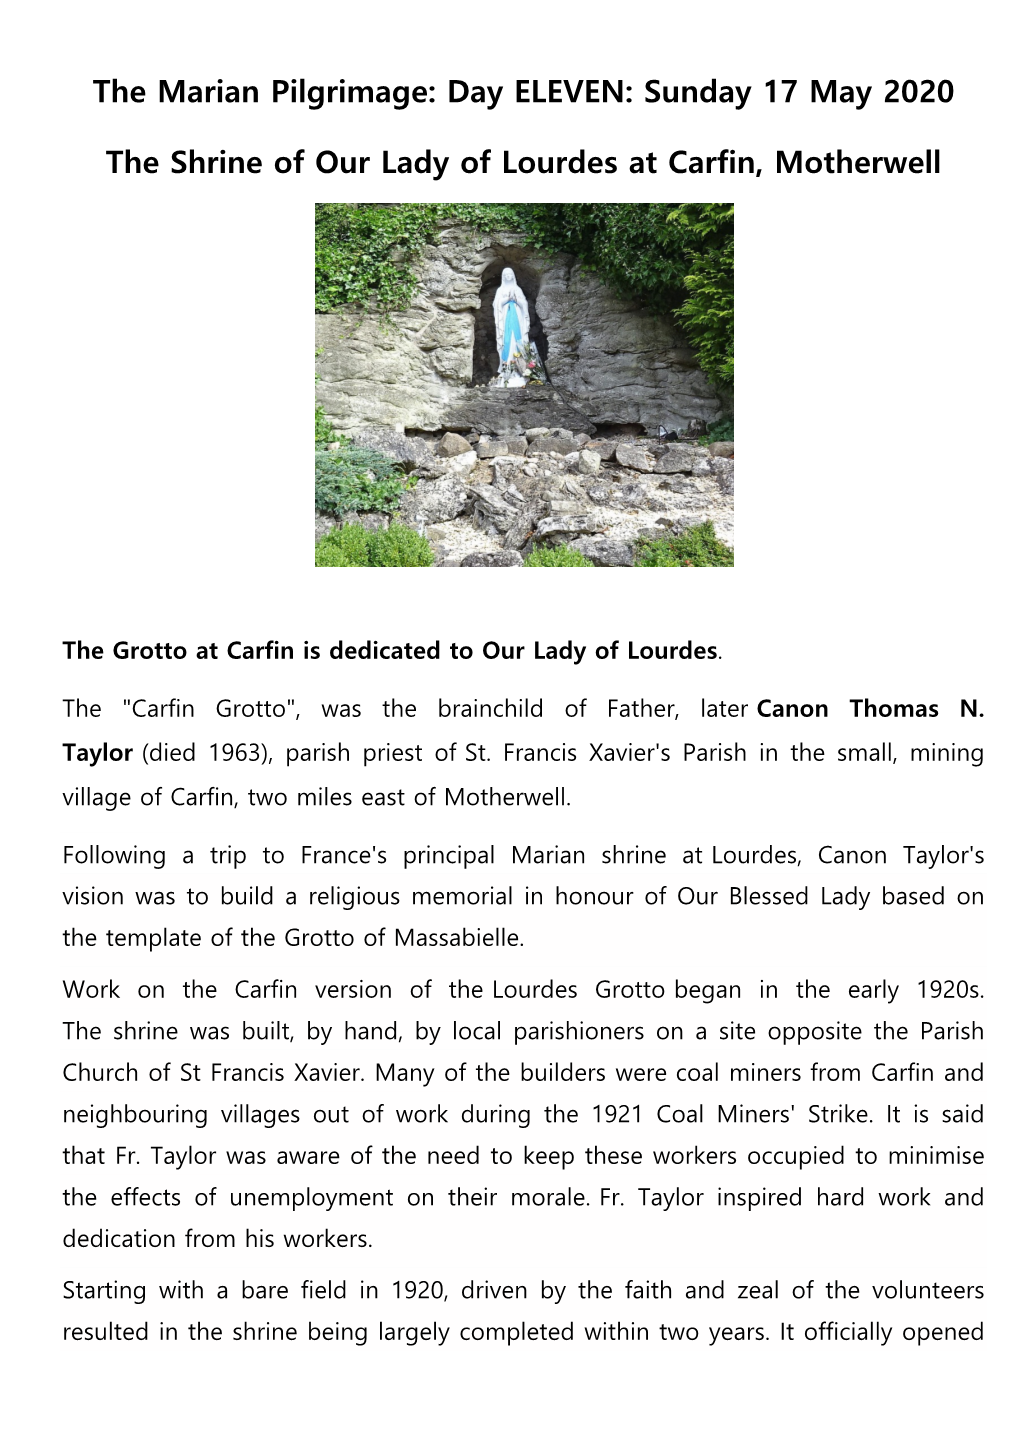 The Marian Pilgrimage: Day ELEVEN: Sunday 17 May 2020 the Shrine Of